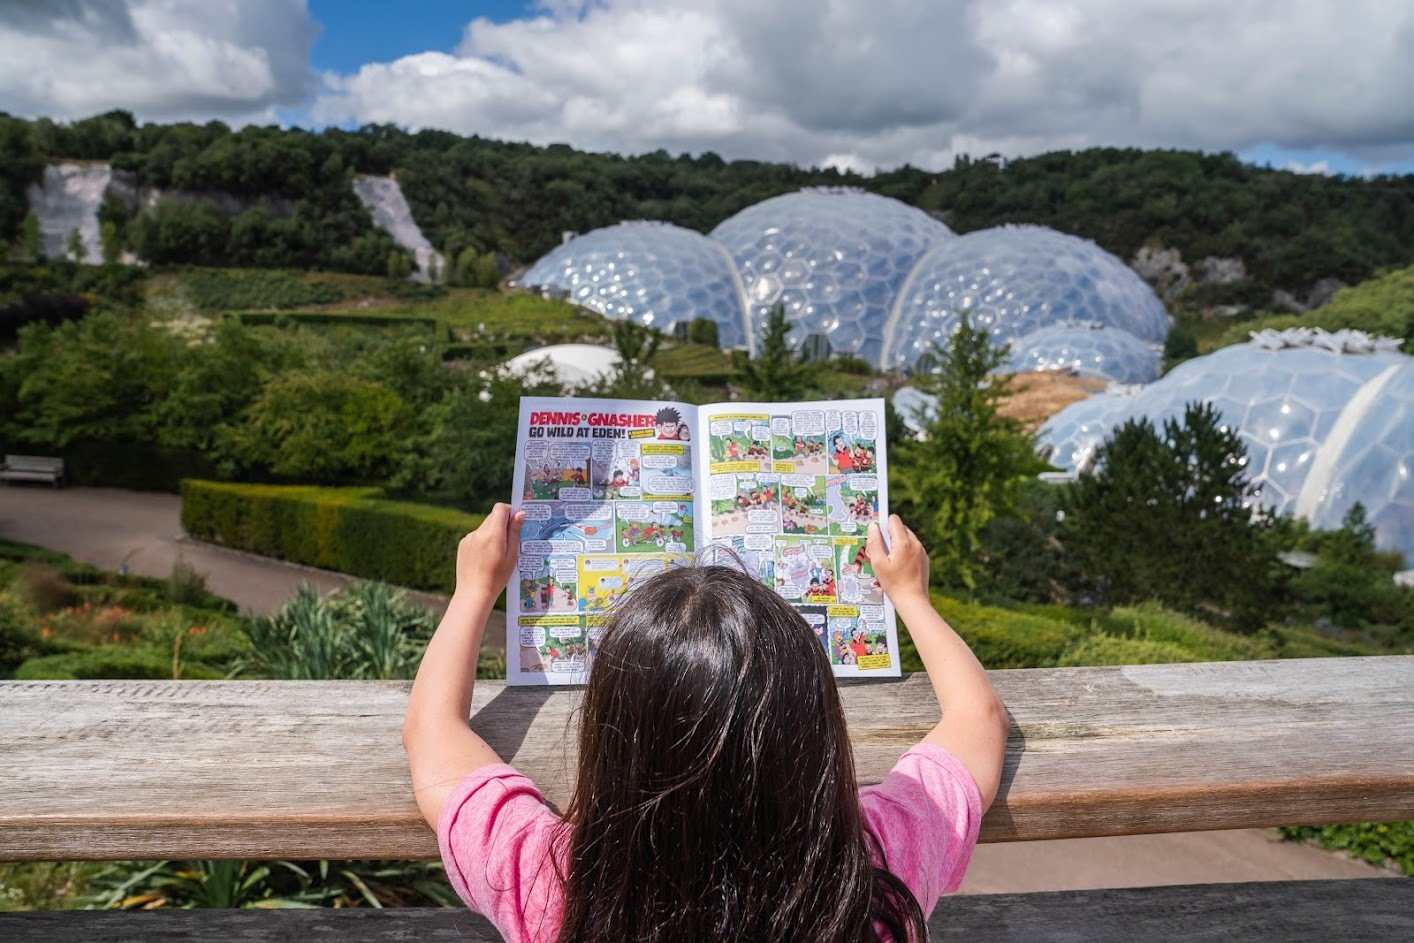 It's all about Beano at the Eden Project this summer.